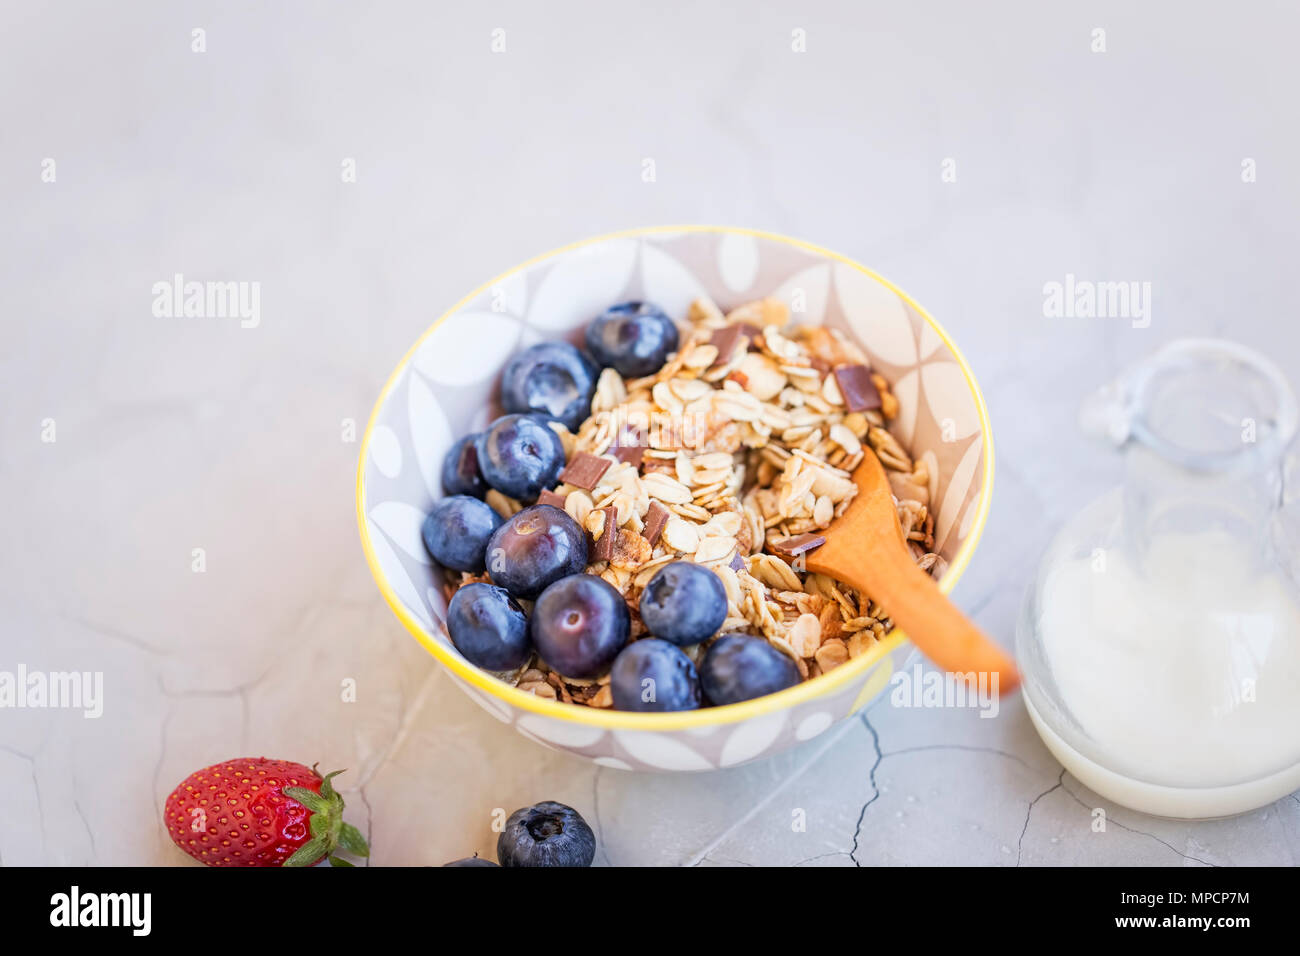 Bowl of muesli with blueberries fruits, healthy breakfast with oatmeal, milk and fruits Stock Photo